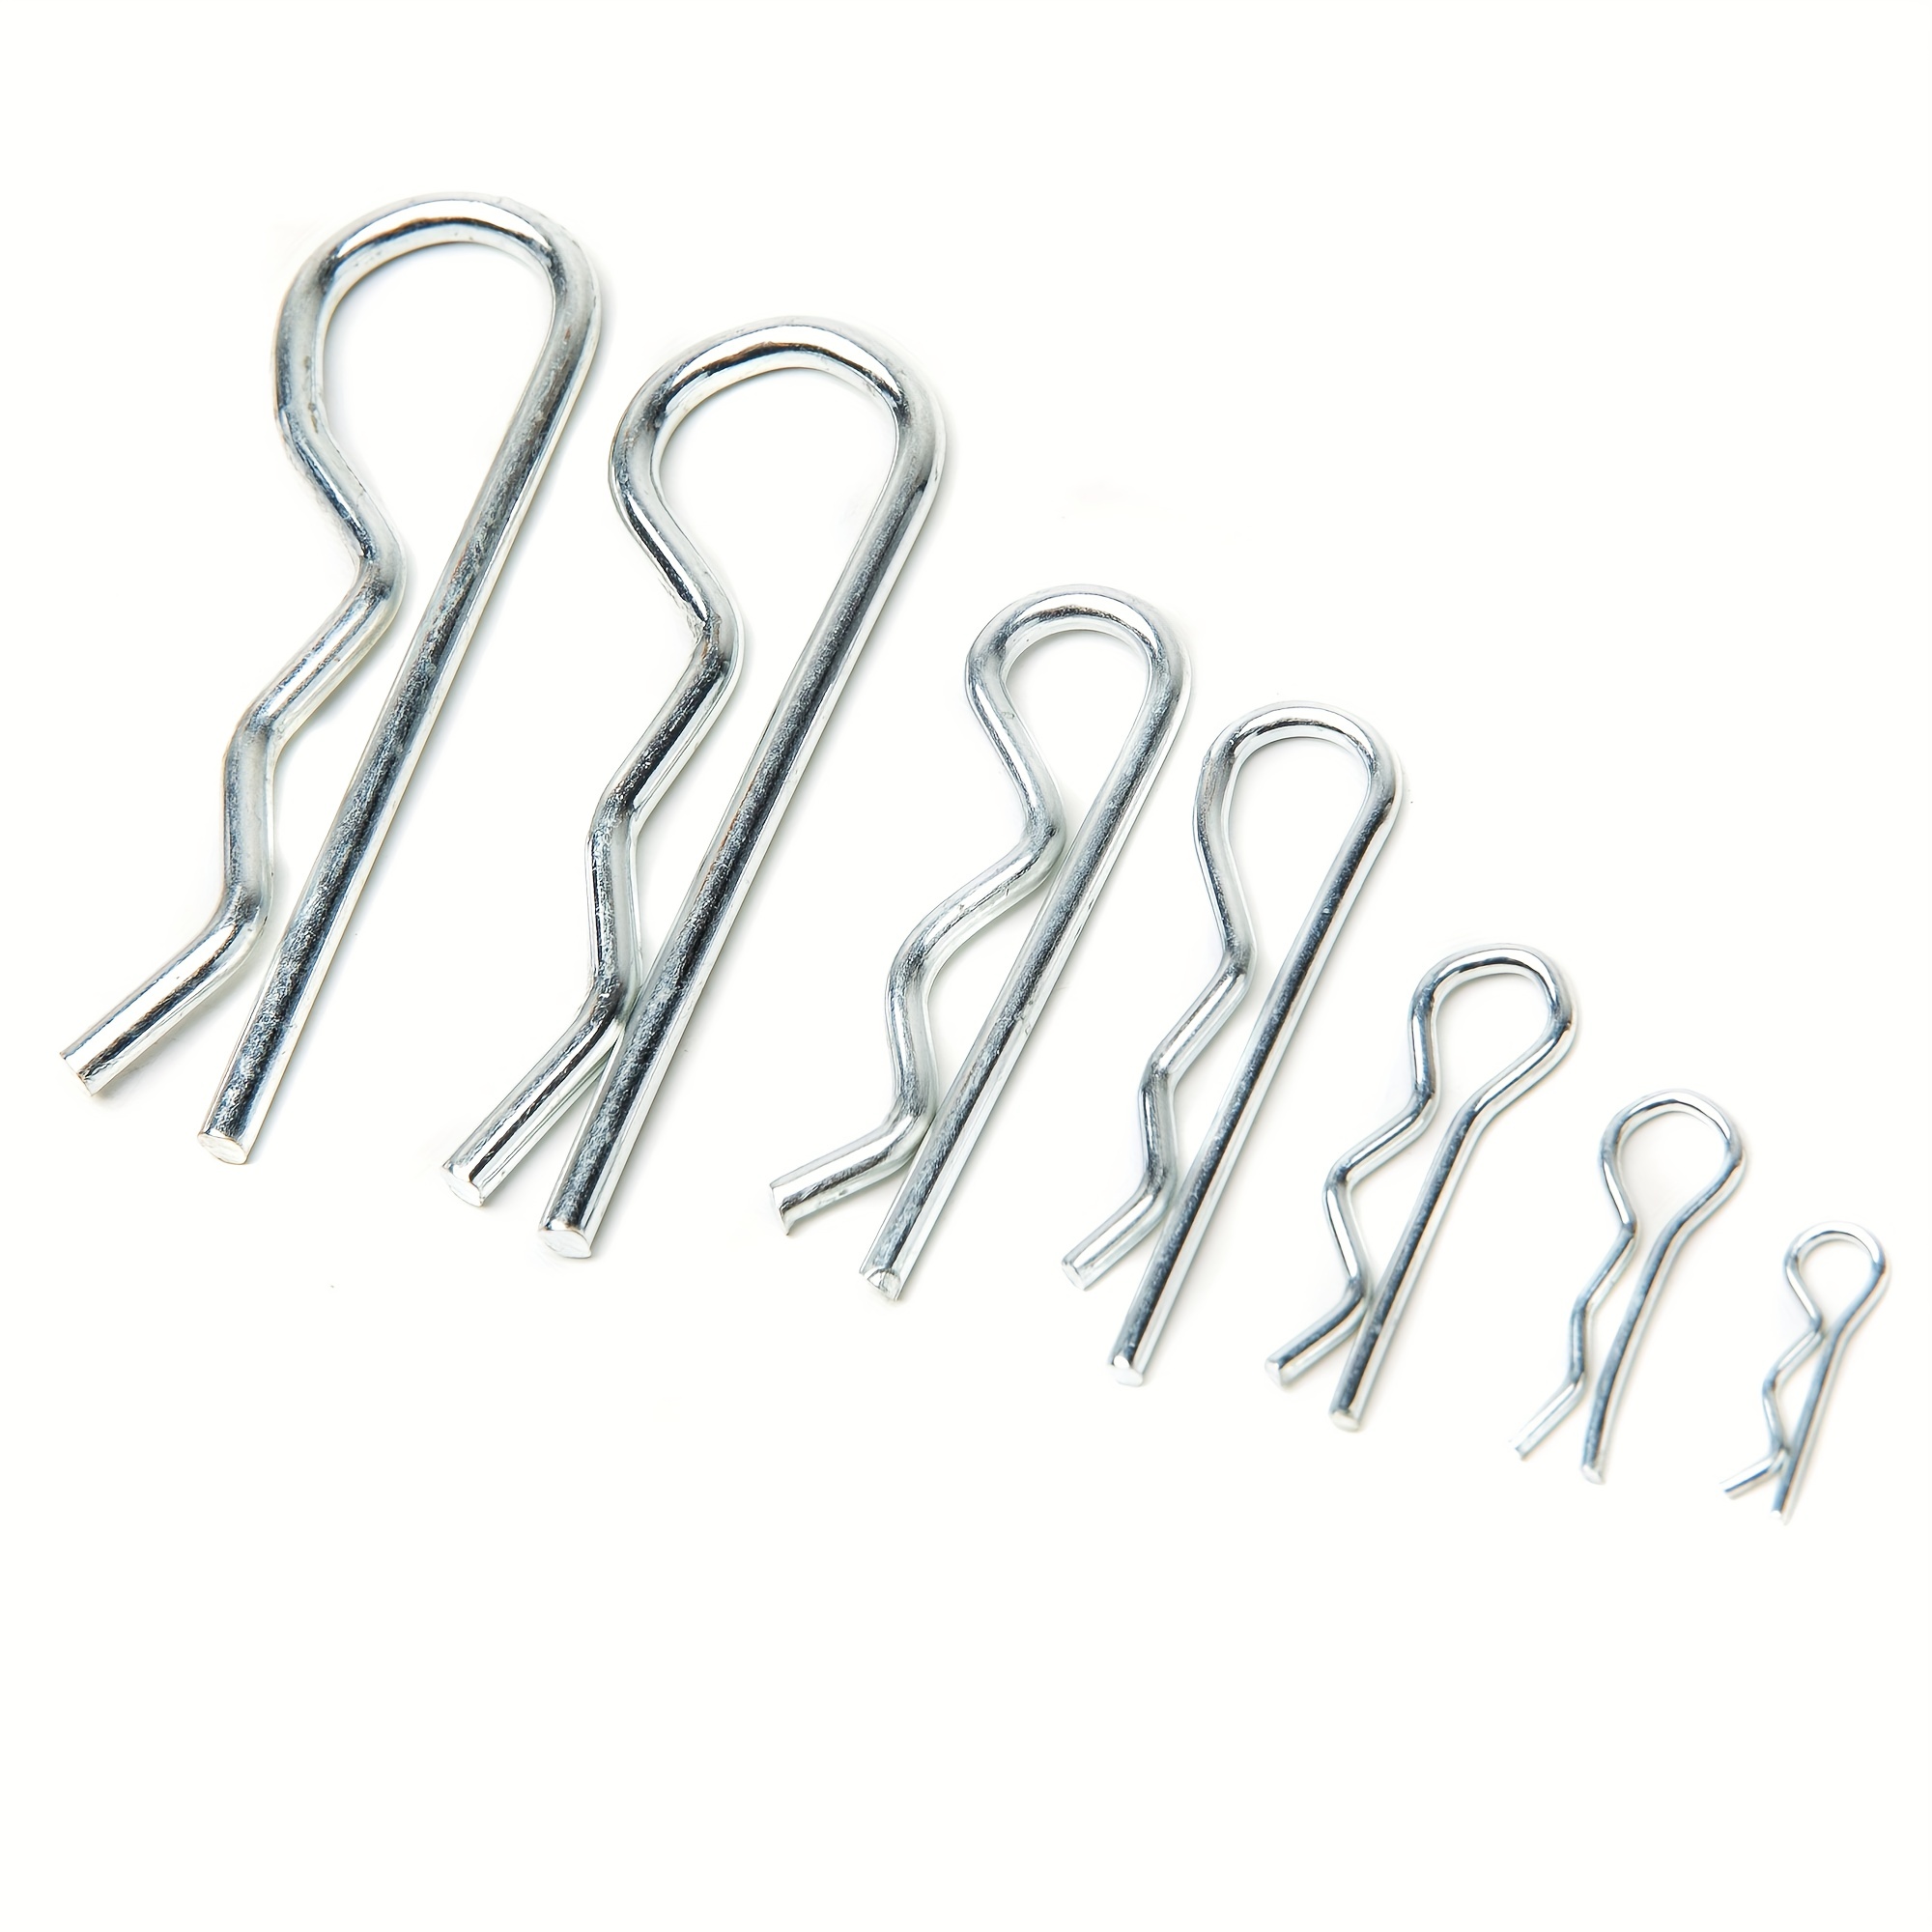 115pcs Hitch Pin Clip R Clips Retaining Pins Tractor Cotter Pin Hair Pin  Assortment Spring Clip Retainer Pins Hitch Keeper Pins Kit For Dolly  Pins/Tra